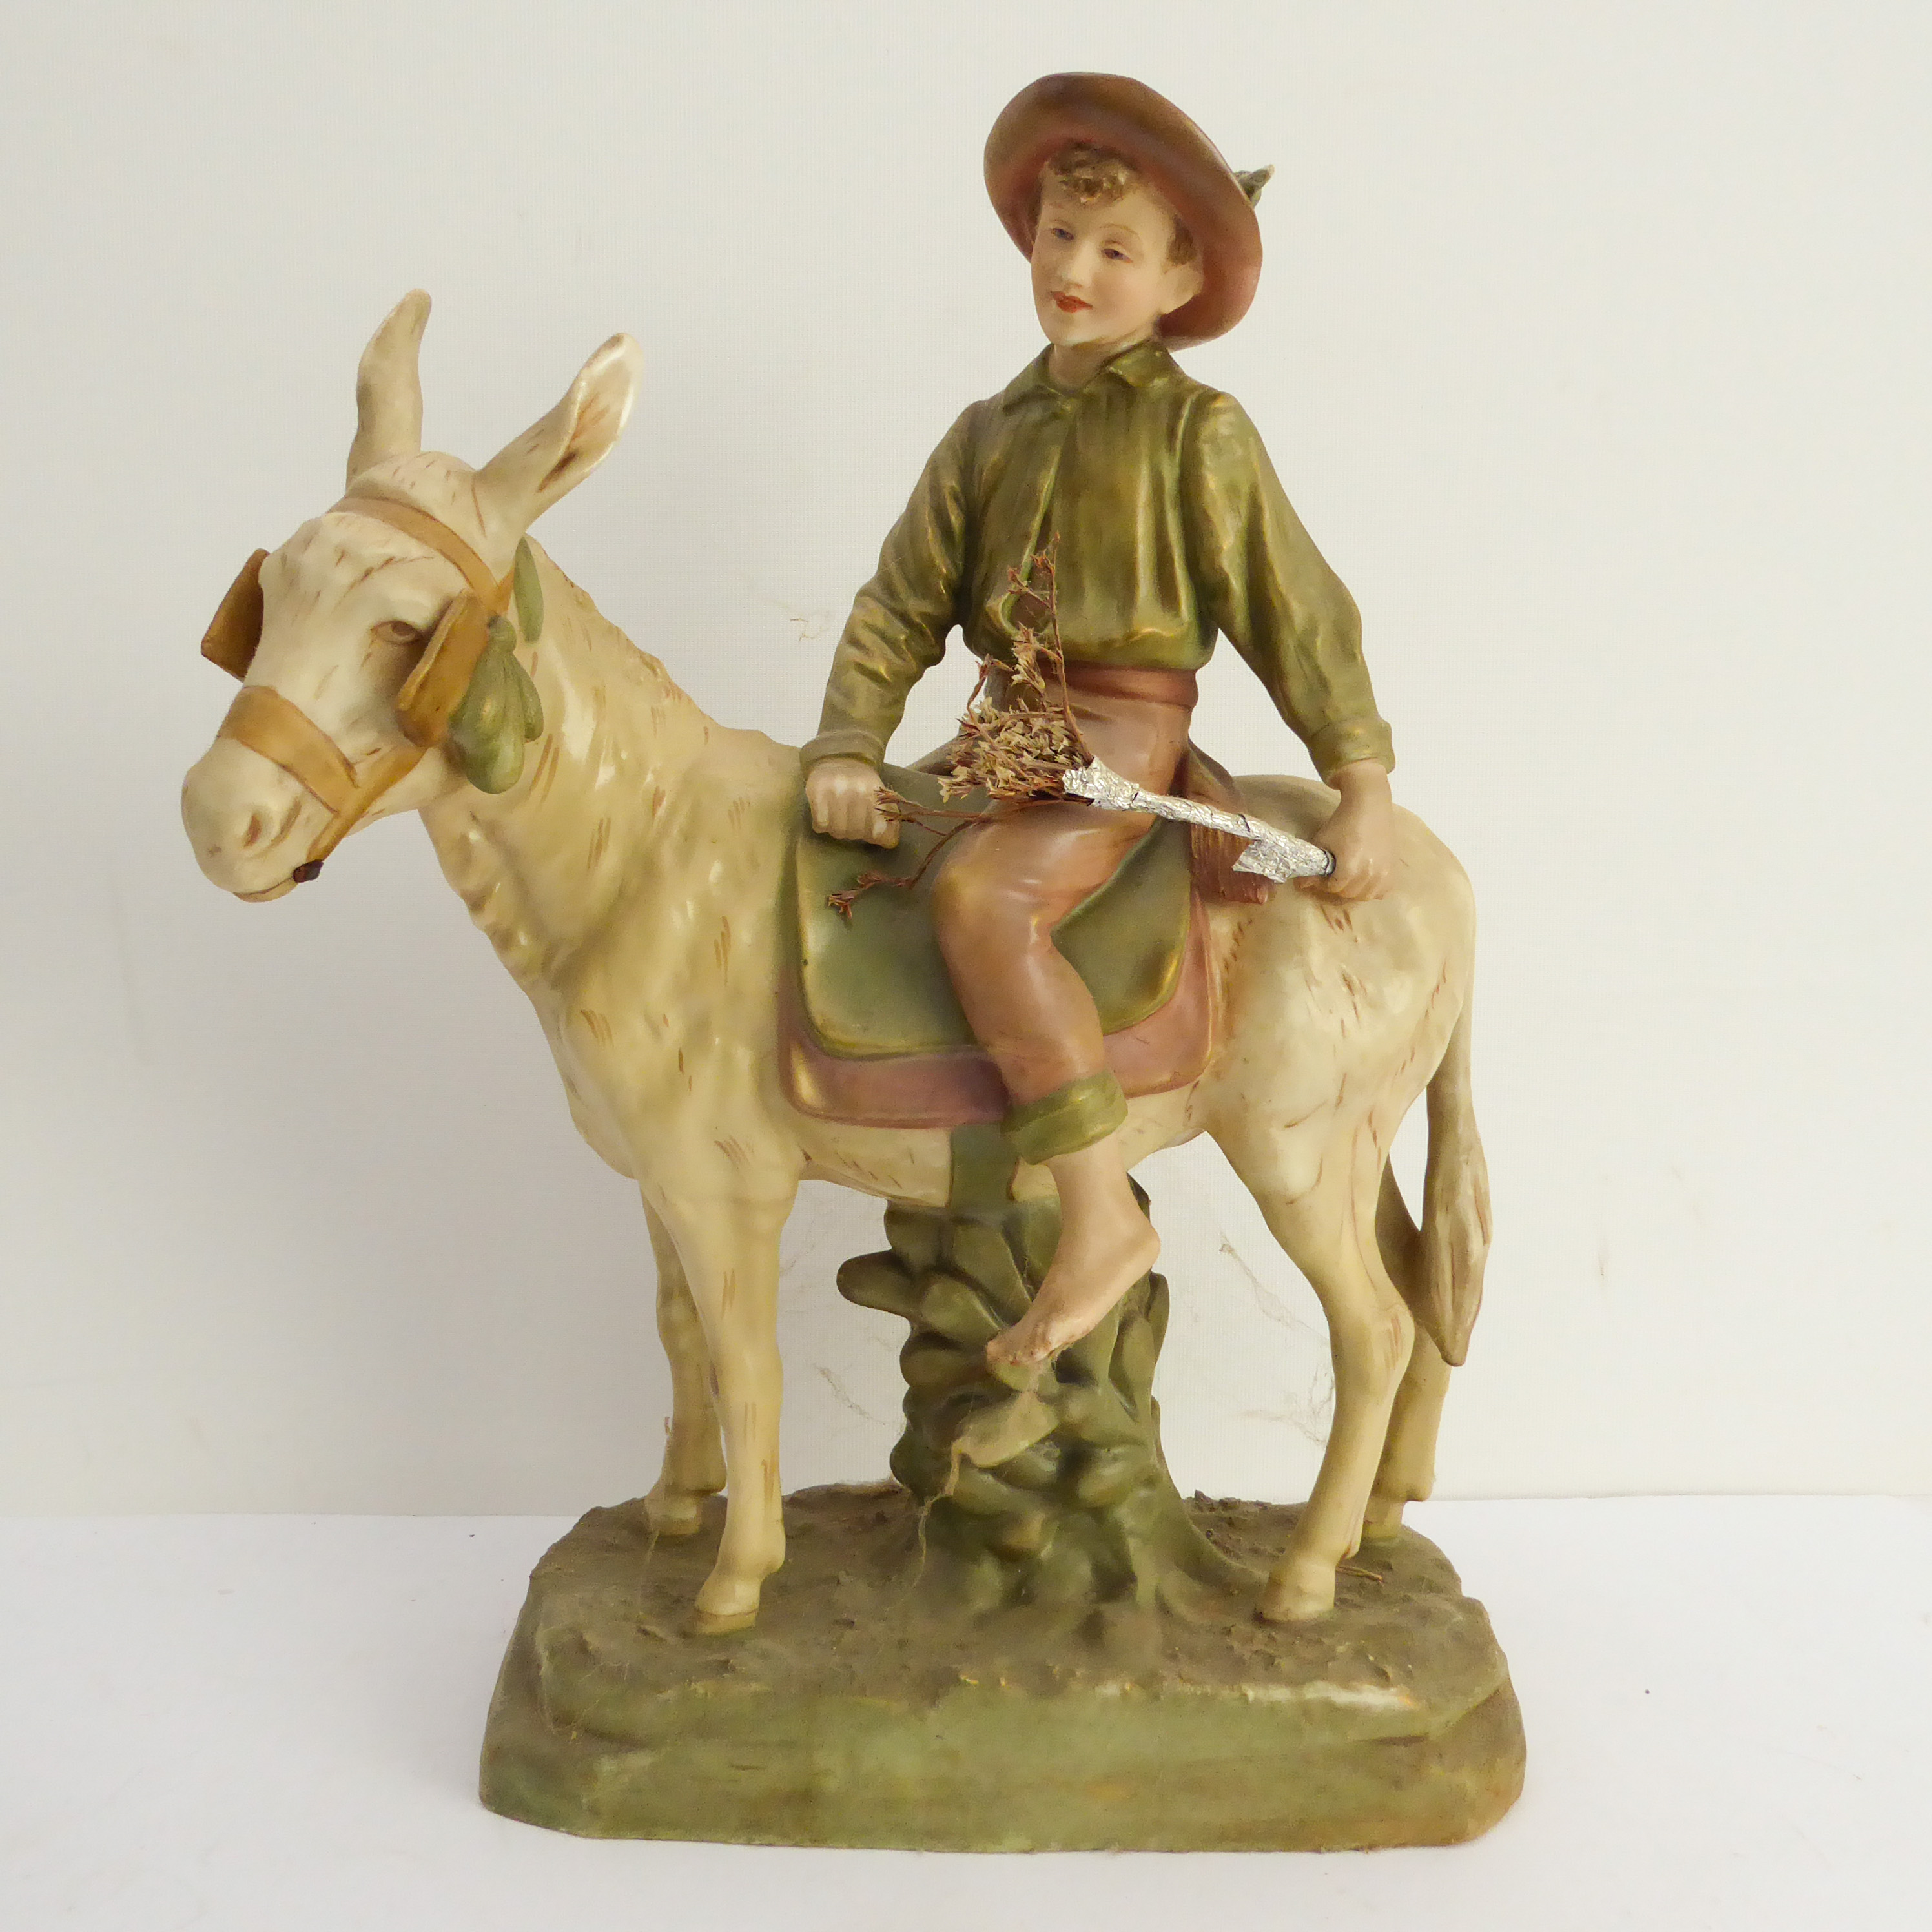 A large Royal Dux hand-decorated porcelain figure of a young boy in wide brimmed hat mounted upon